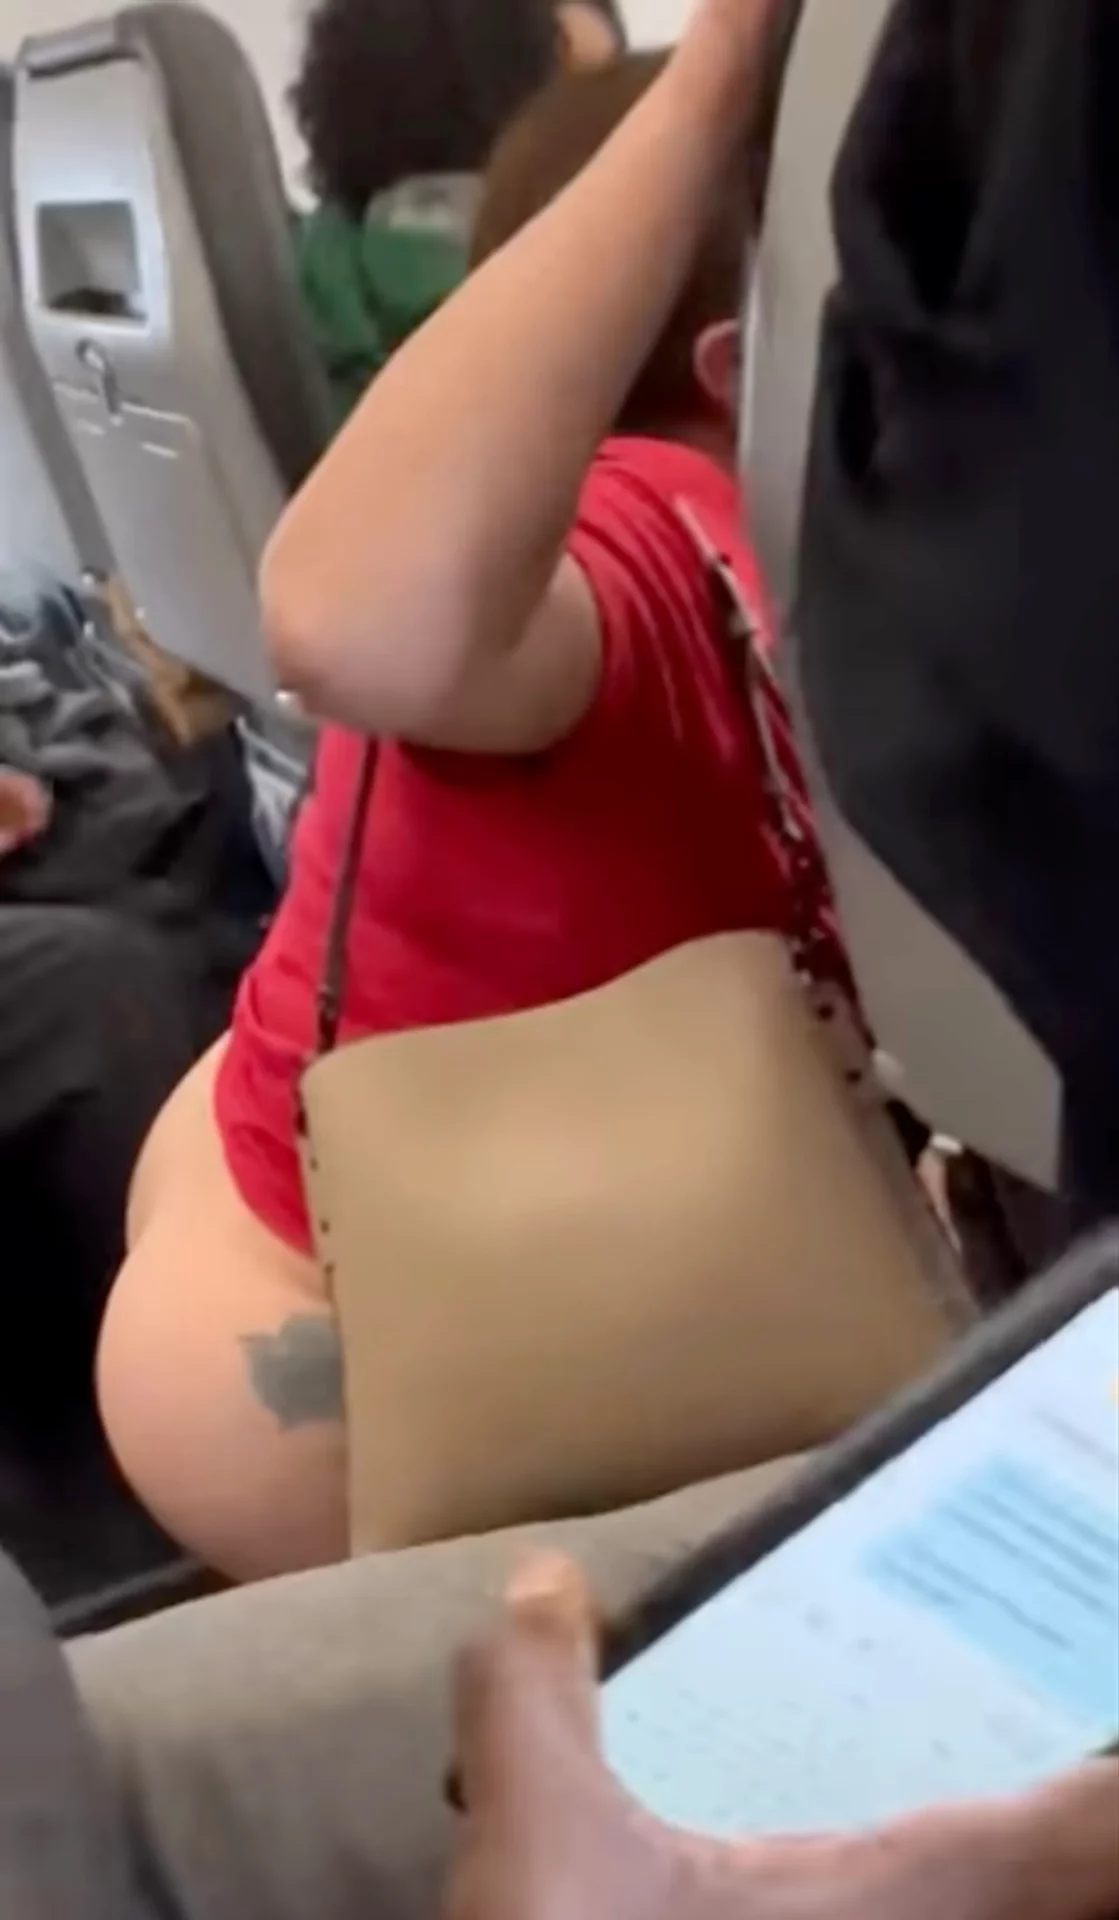 In the USA, a tourist pulled down her pants and publicly relieved herself in the aisle of the plane